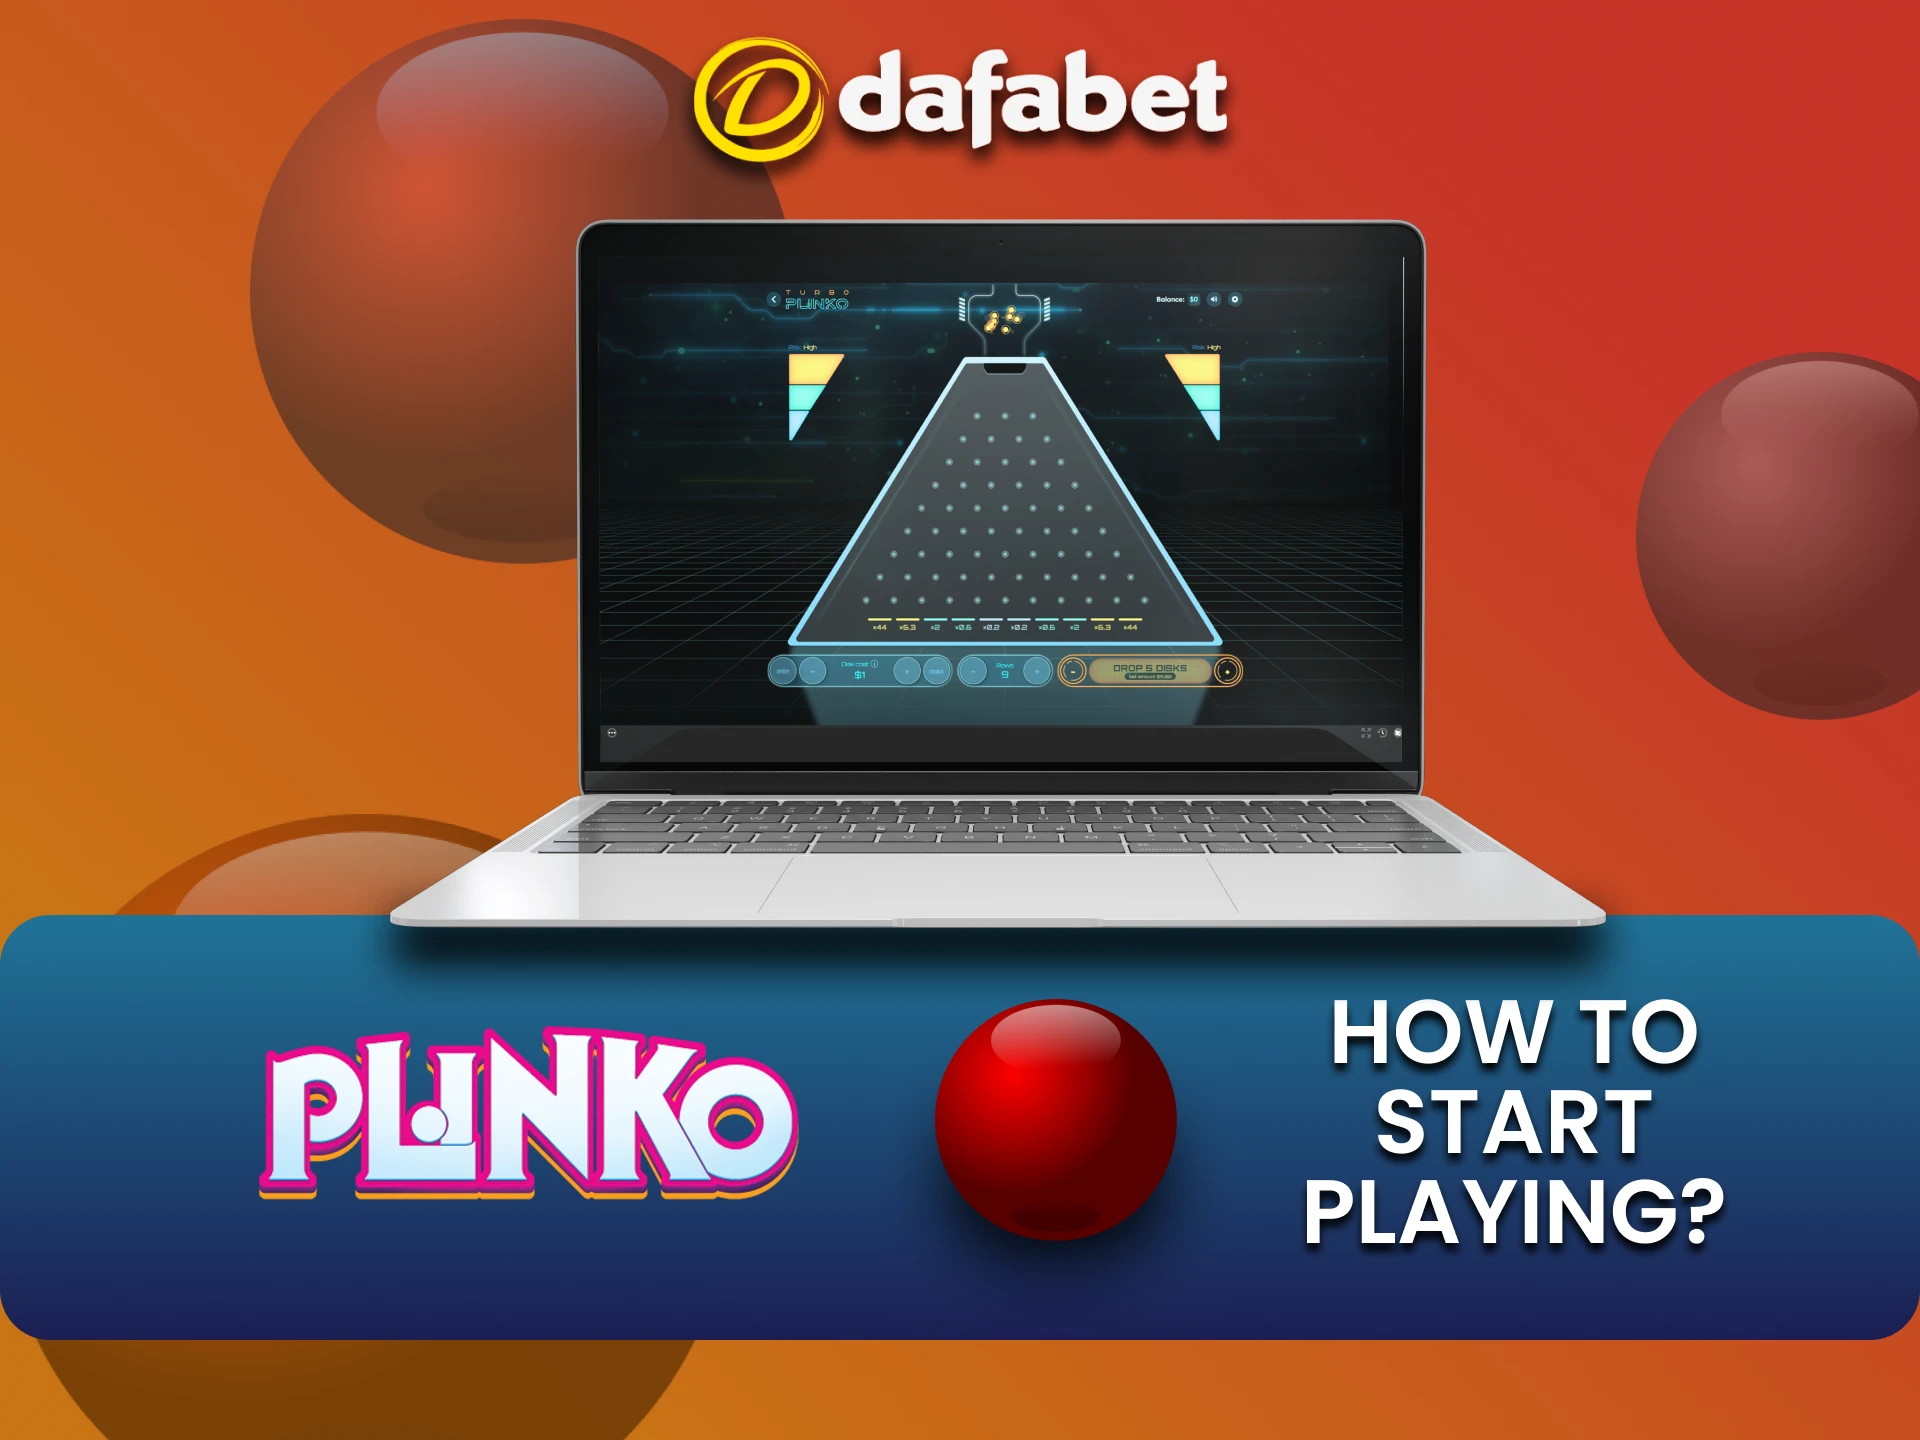 Go to the games section on Dafabet to play Plinko.